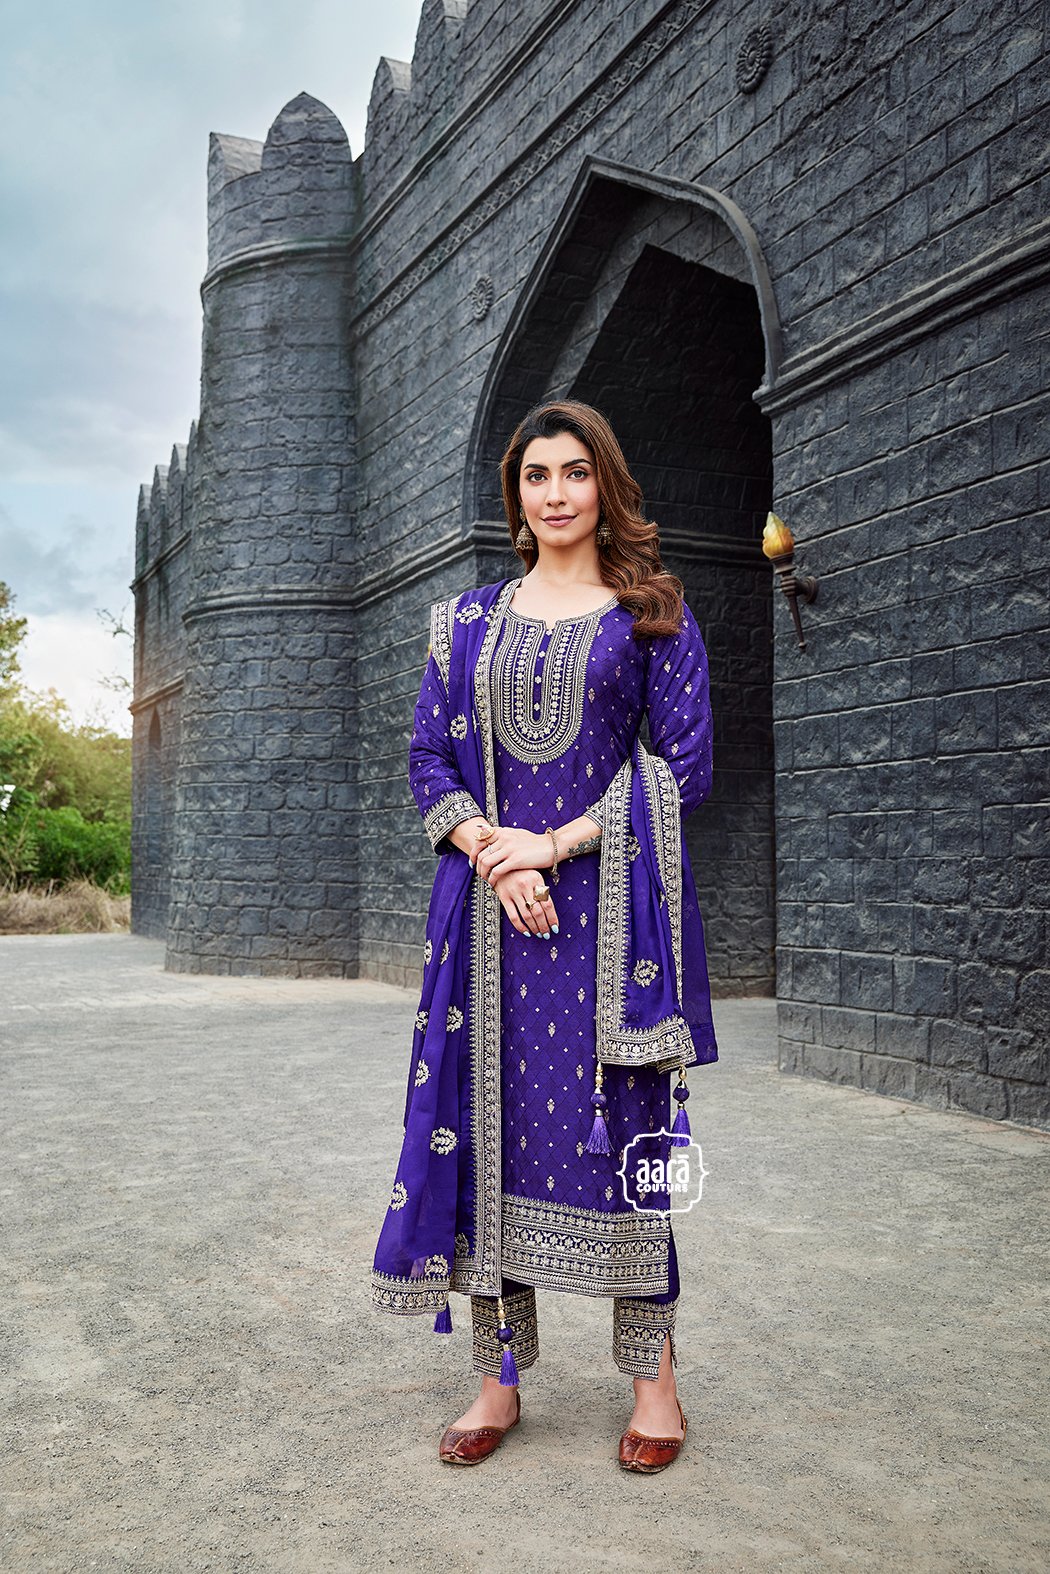 Buy Brijraj Casual Wear Purple Coloured Satin Embelished Straight Suit with  a Matching Bottom and Purple Chiffon Dupatta at Amazon.in